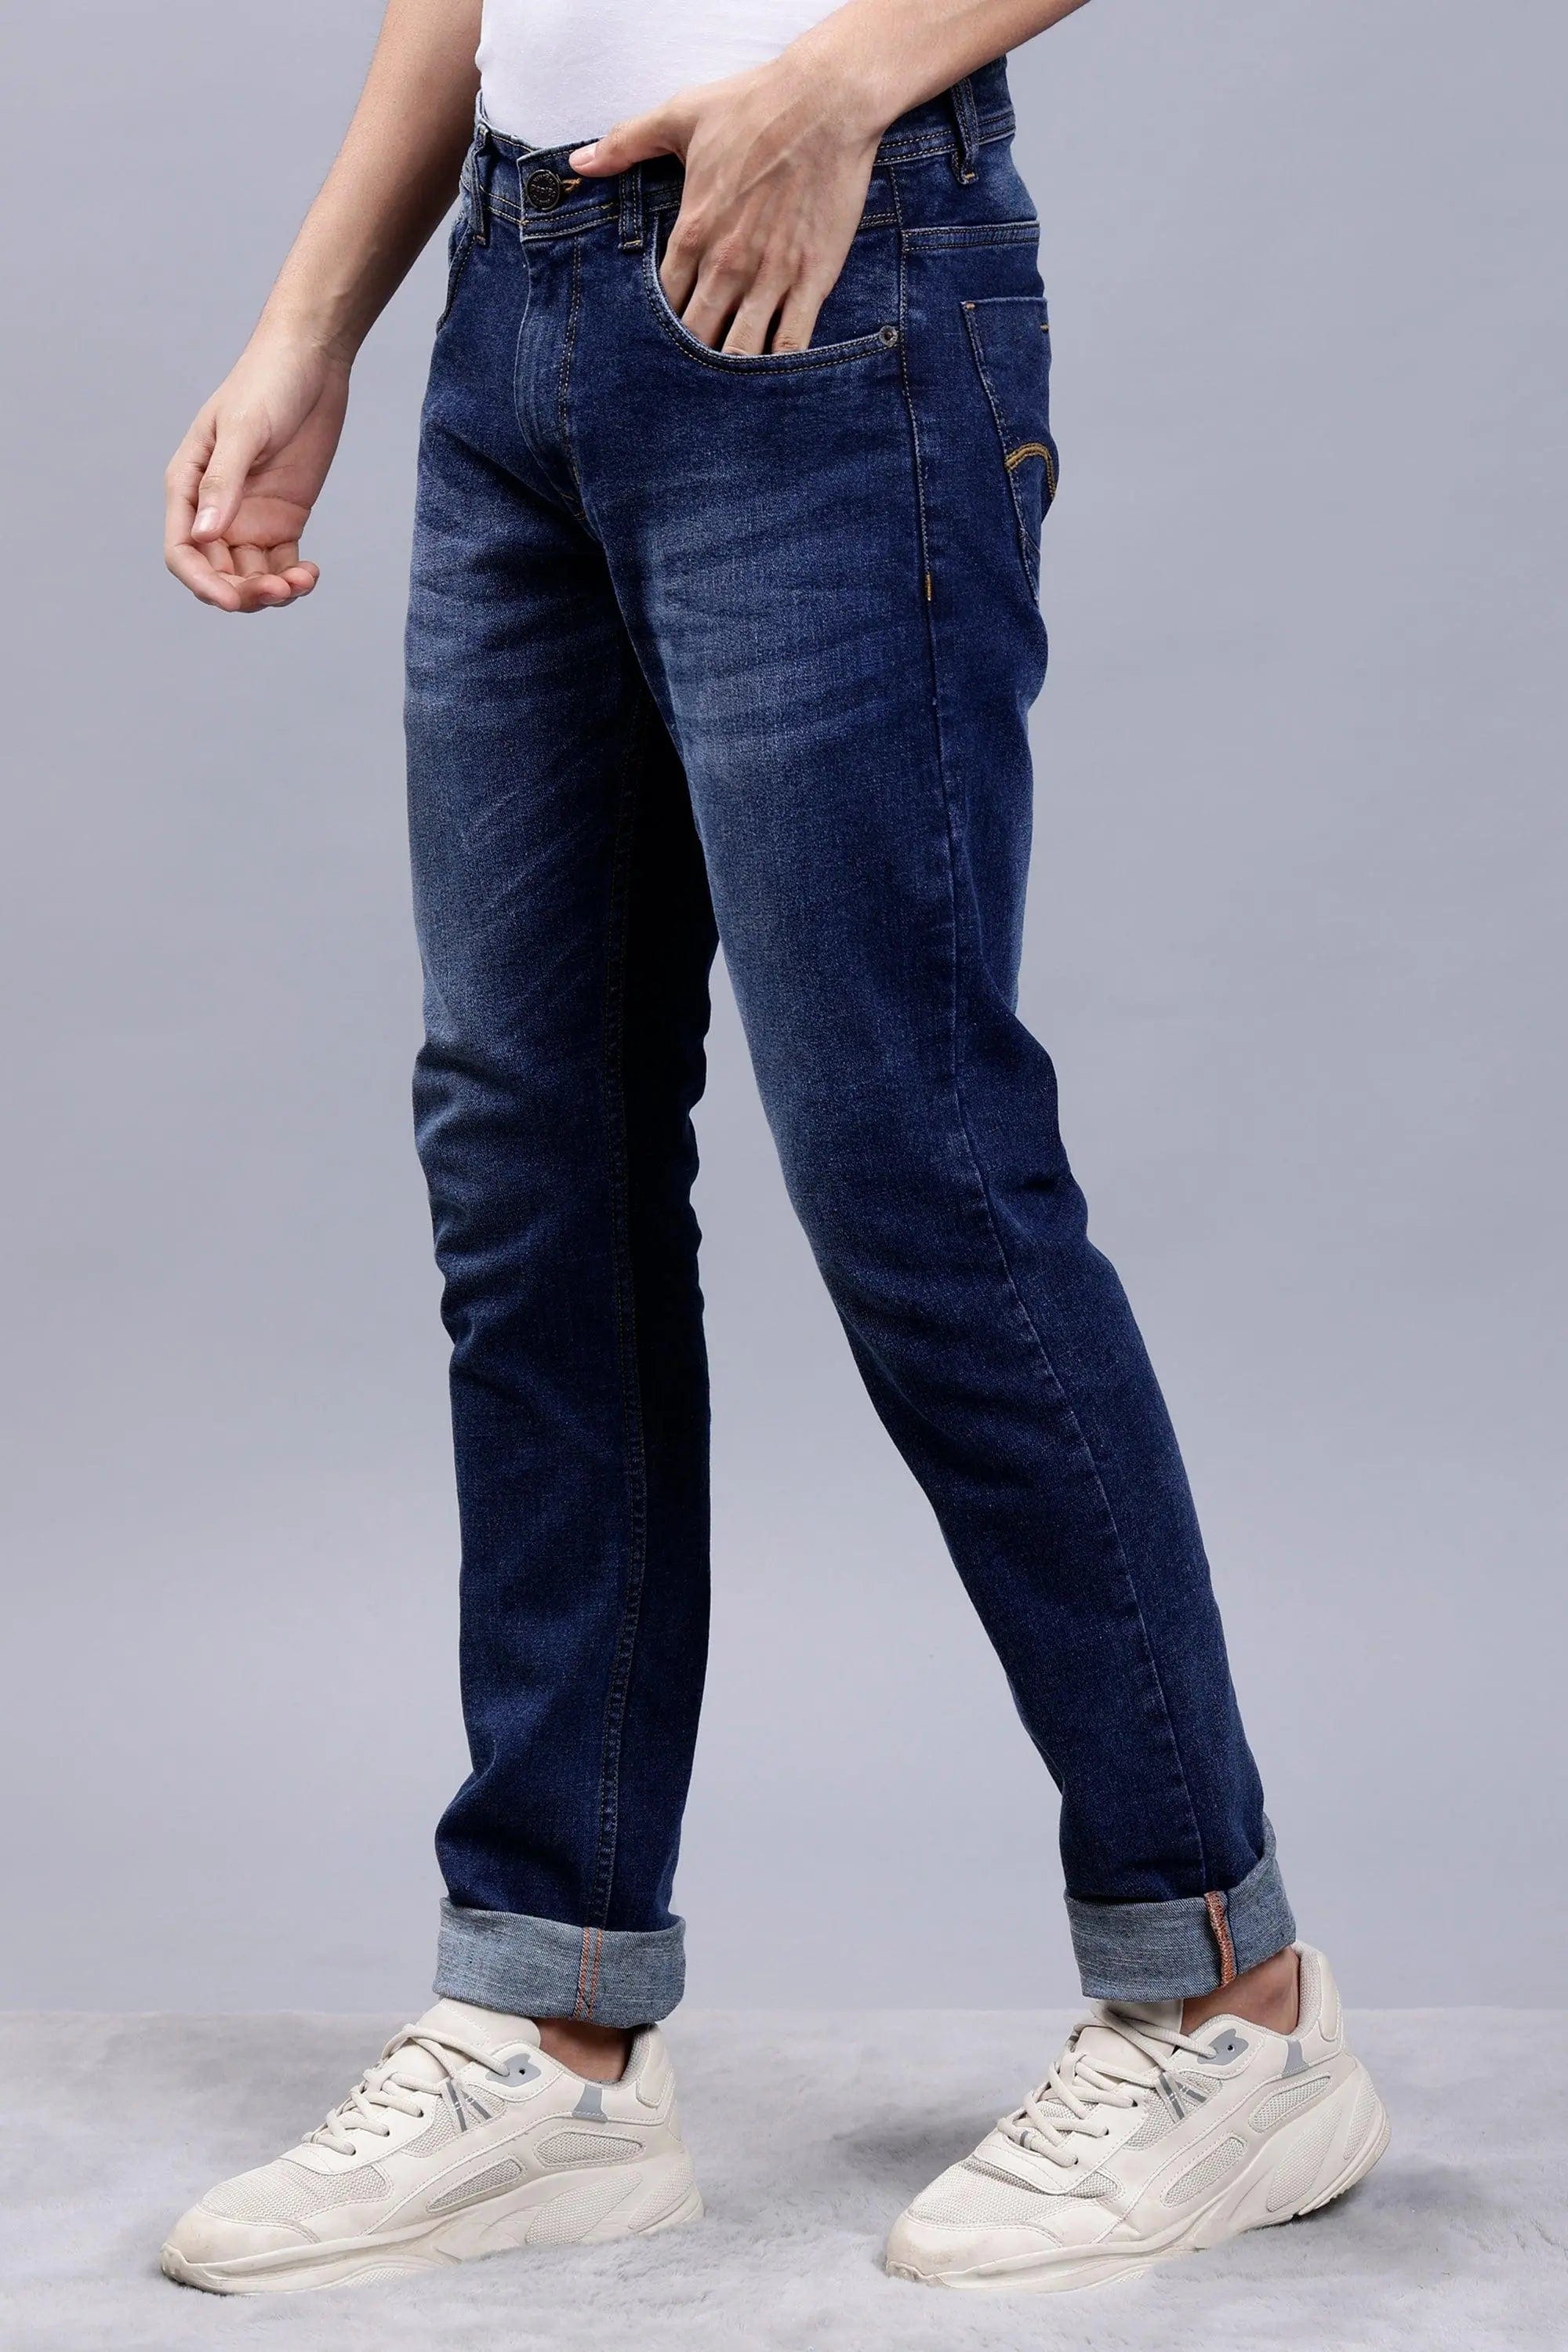 The Cotton Company Men's Stretch Slim Fit Blue Denim Jeans  (Jeans001_M_Blue_34) : Amazon.in: Clothing & Accessories